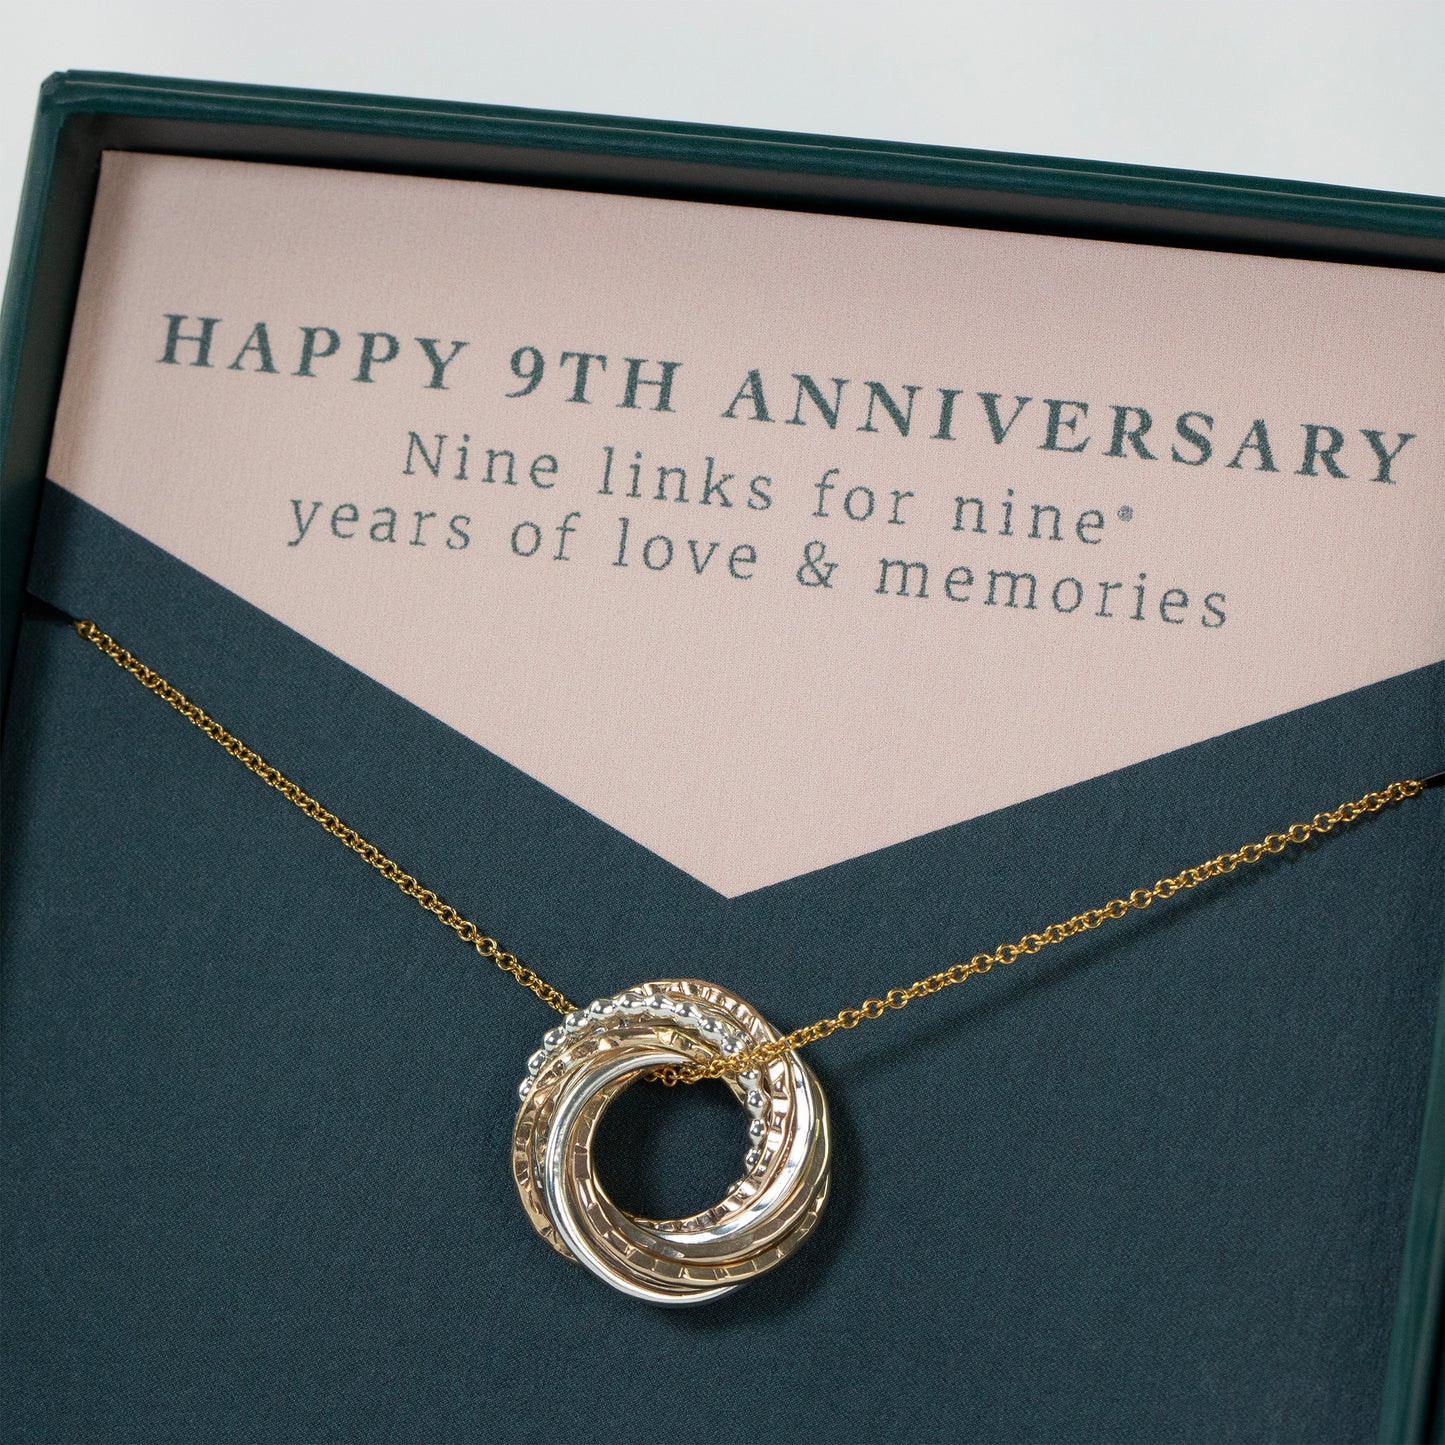 9th Anniversary Necklace - The Original Nine Rings for Nine Years - Petite Silver & Gold